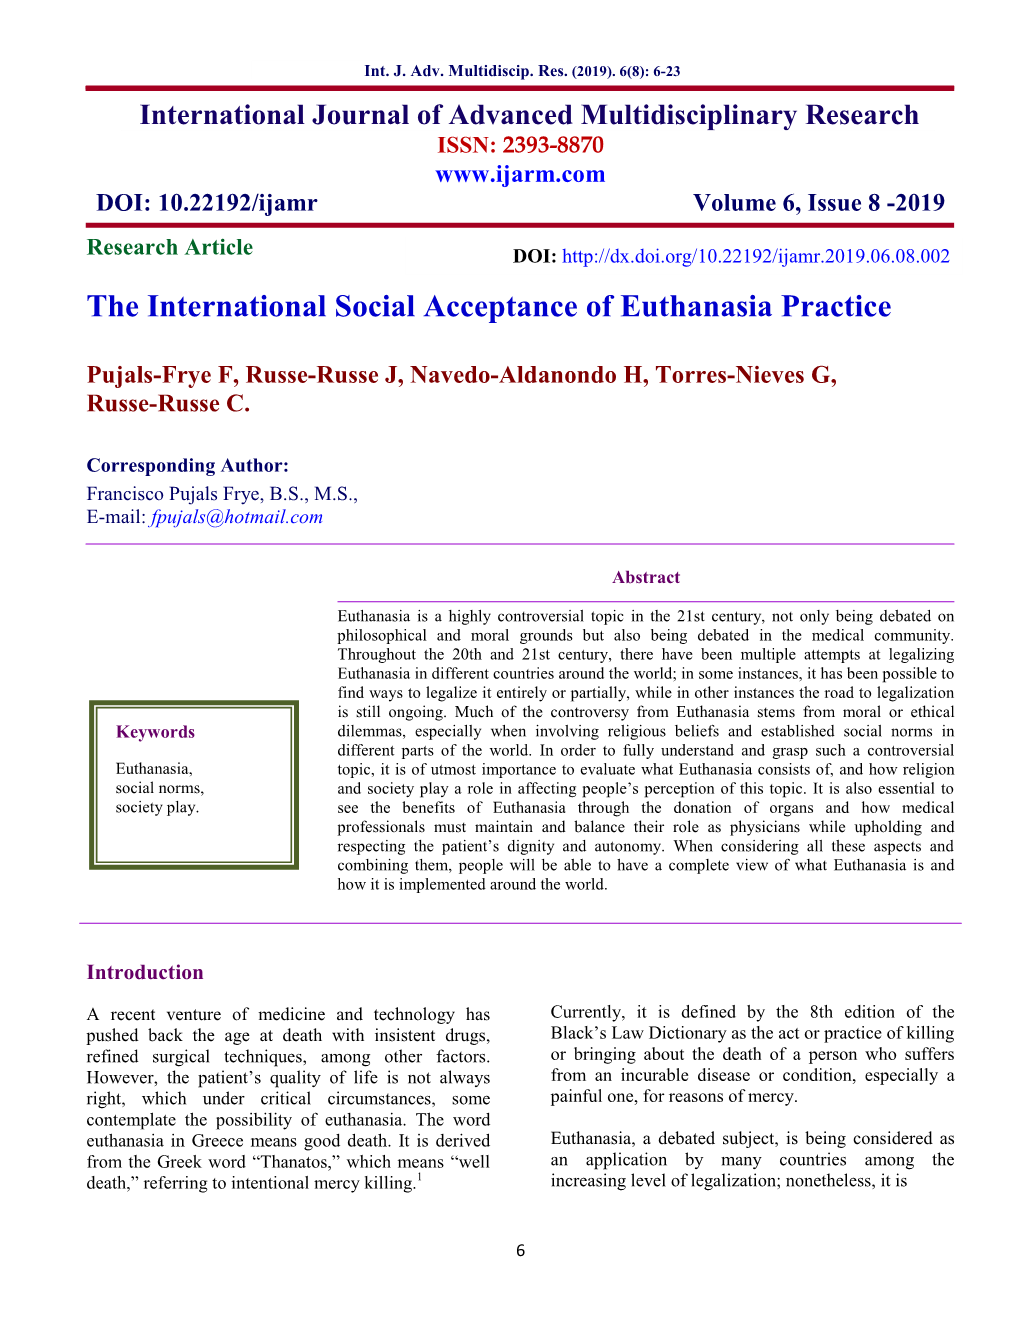 The International Social Acceptance of Euthanasia Practice